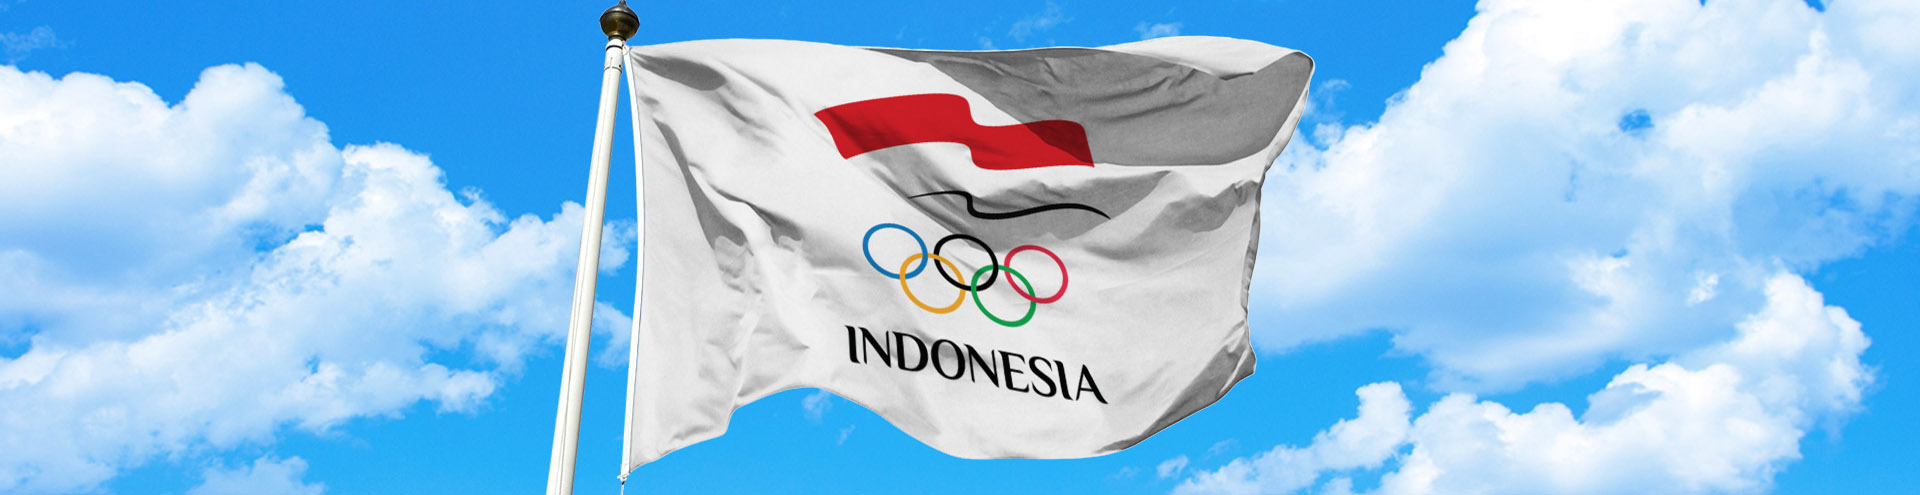 IOC Confirms Citra Febrianti's London 2012 Medal - Indonesia Olympic Commitee